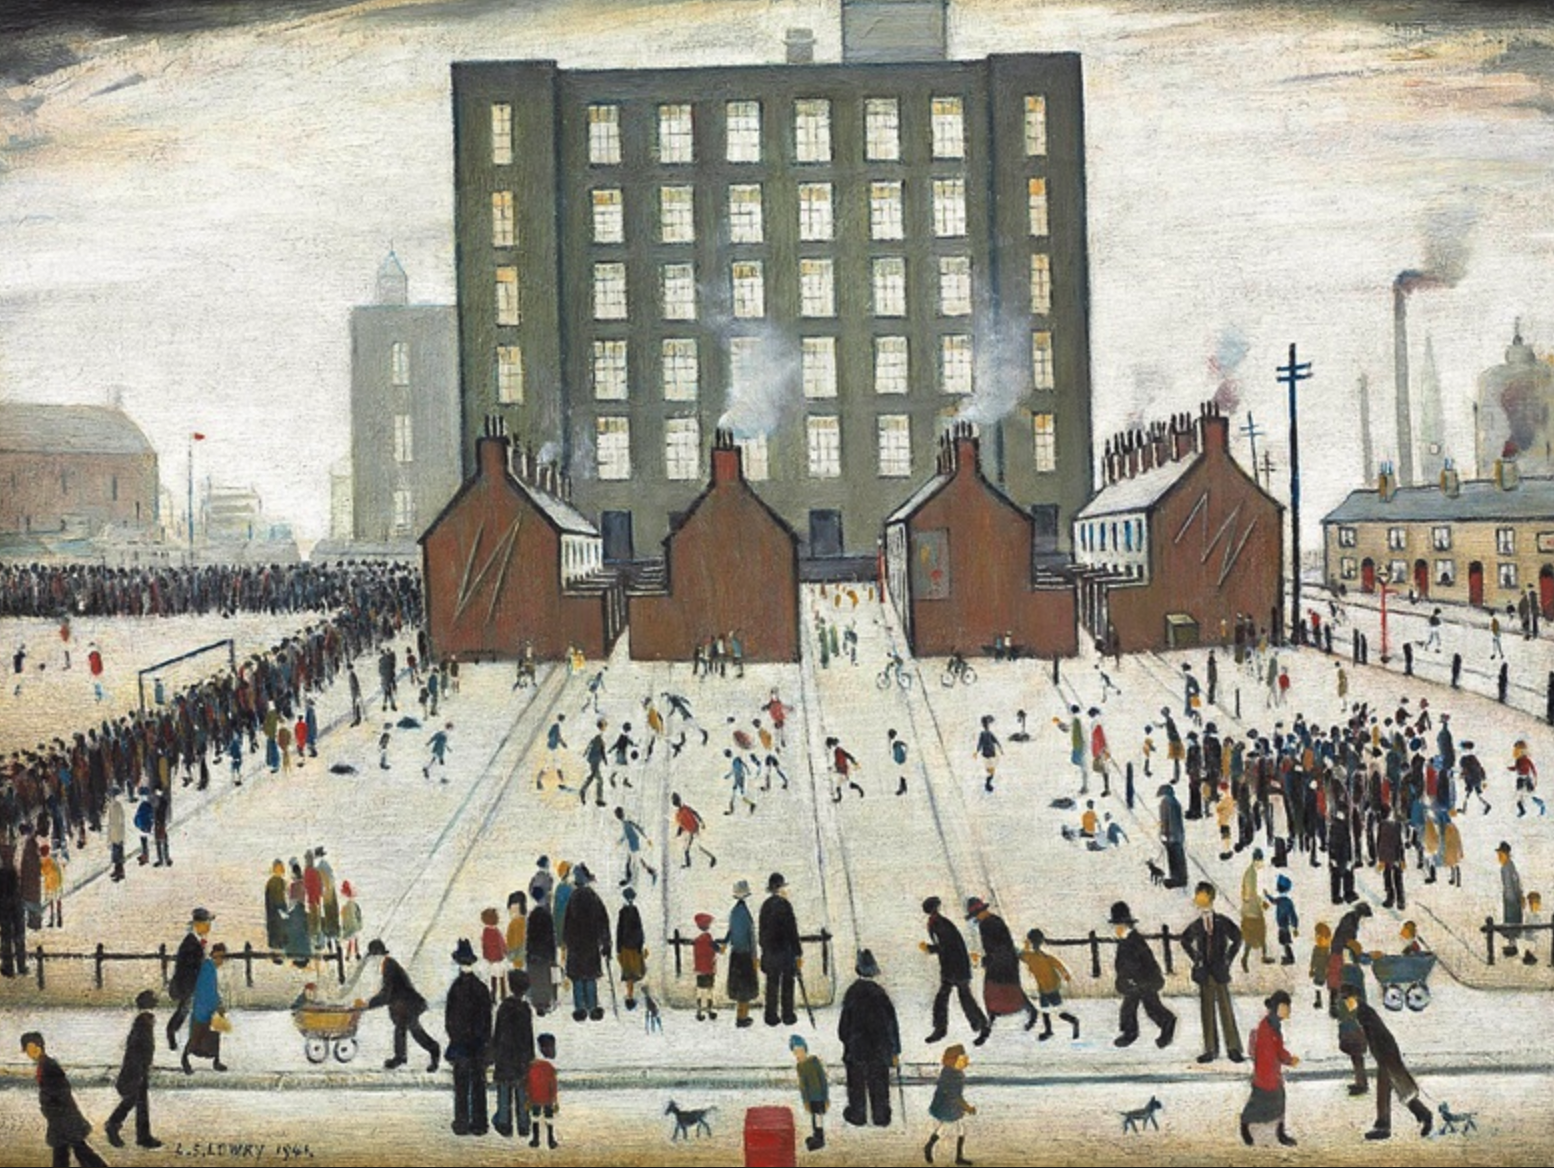 Saturday Afternoon (1941) by Laurence Stephen Lowry (1887 - 1976), English artist.